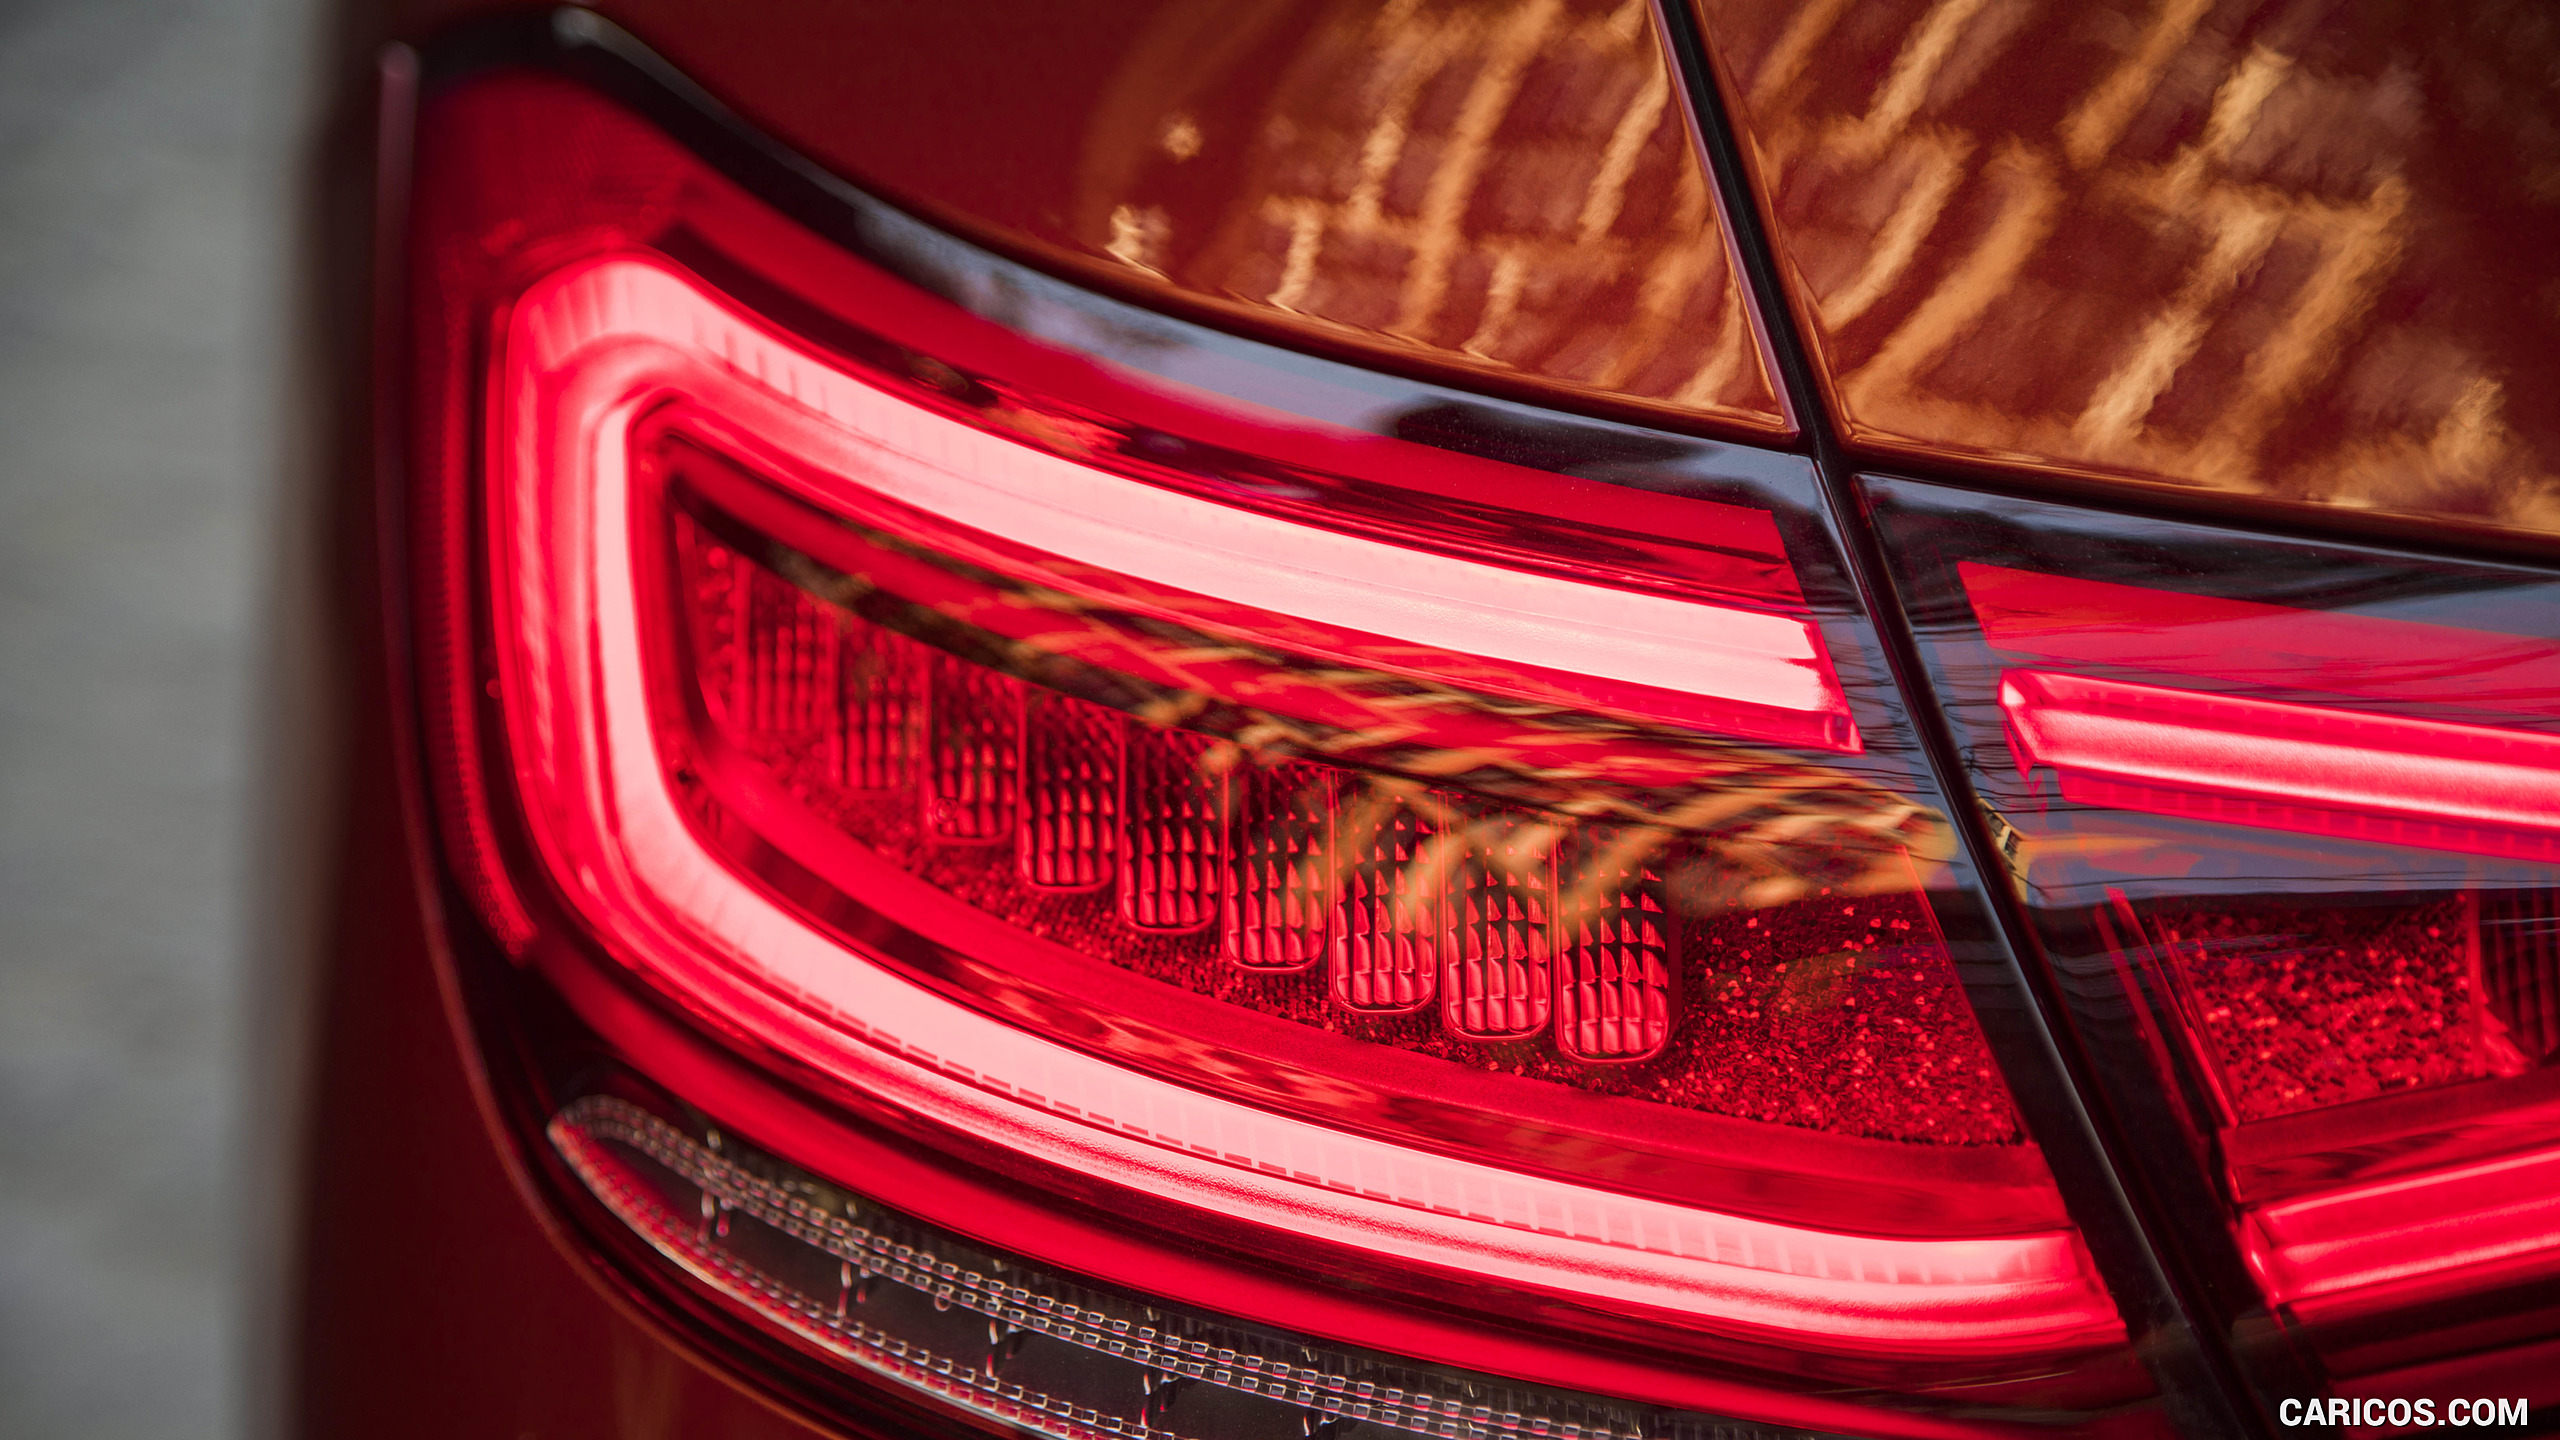 2019 Mercedes-Benz CLS 450 4MATIC (US-Spec) - Tail Light, #209 of 231